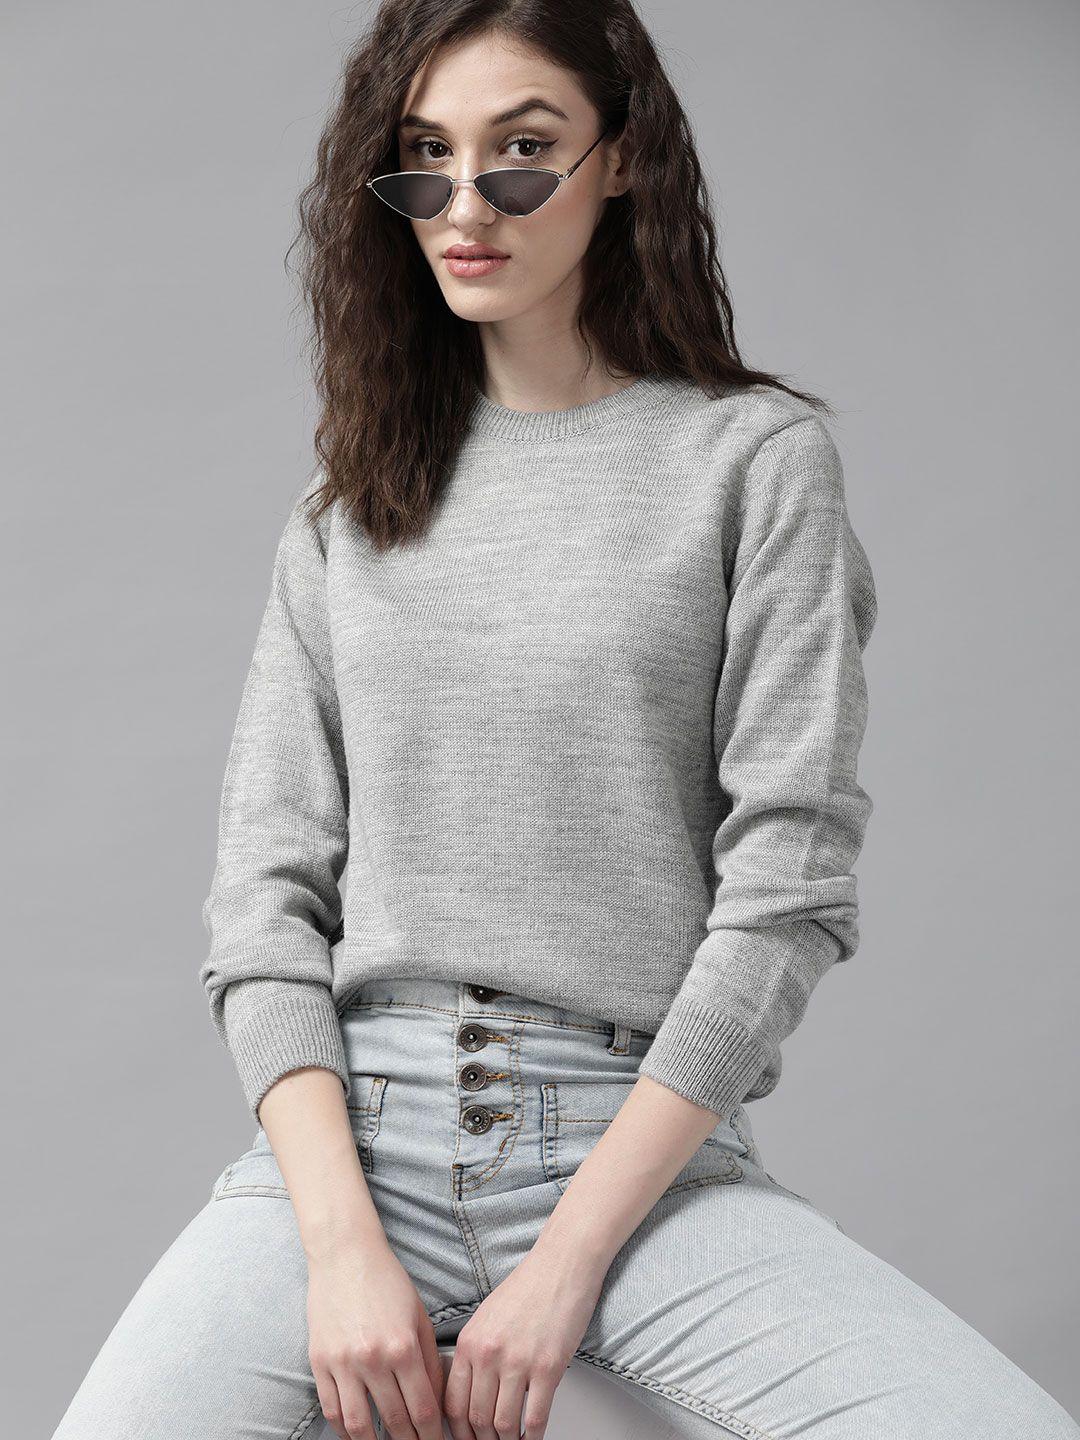 the roadster lifestyle co. women grey melange solid sweater